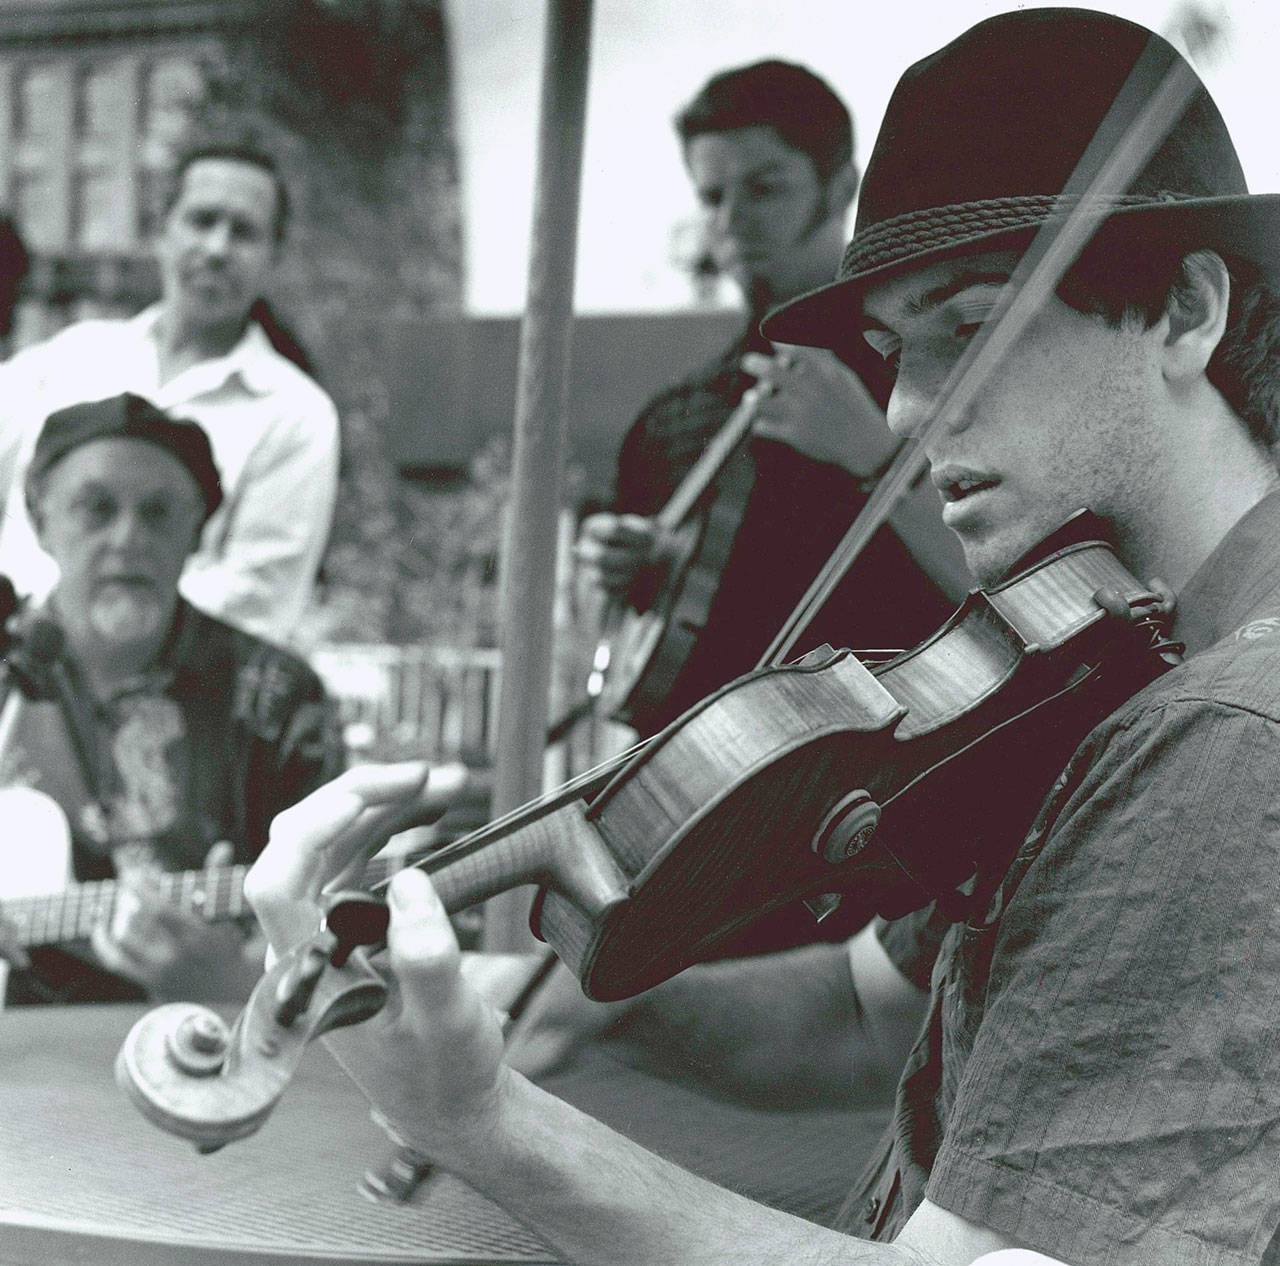 Gypsy jazz band to play free concert outside